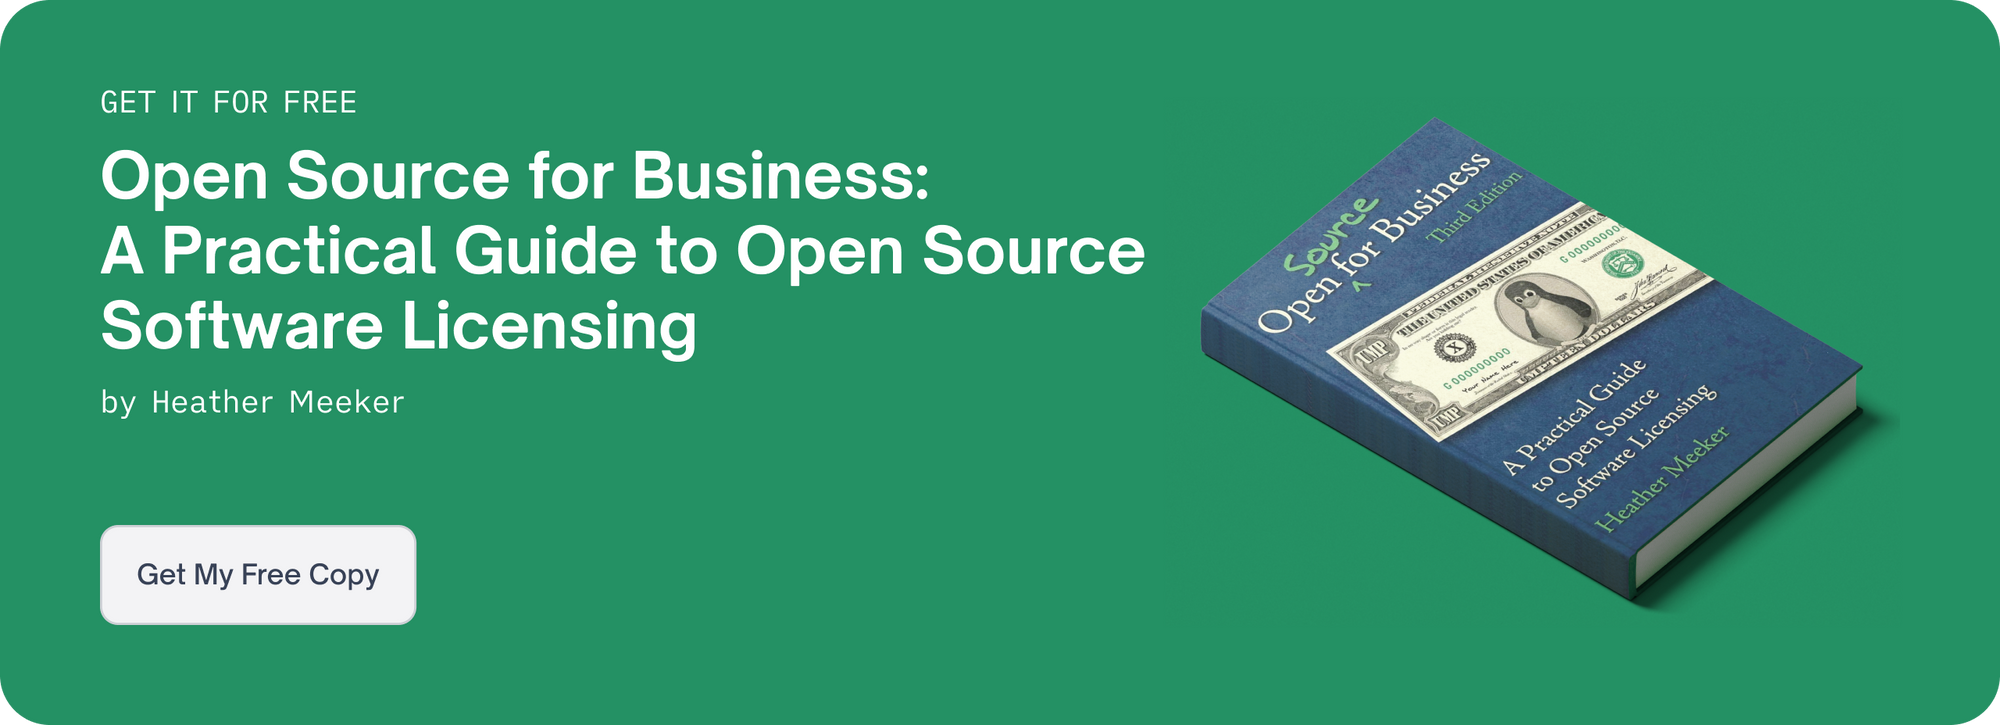 A Comprehensive Guide to Source-Available Software Licenses, Featuring Heather Meeker